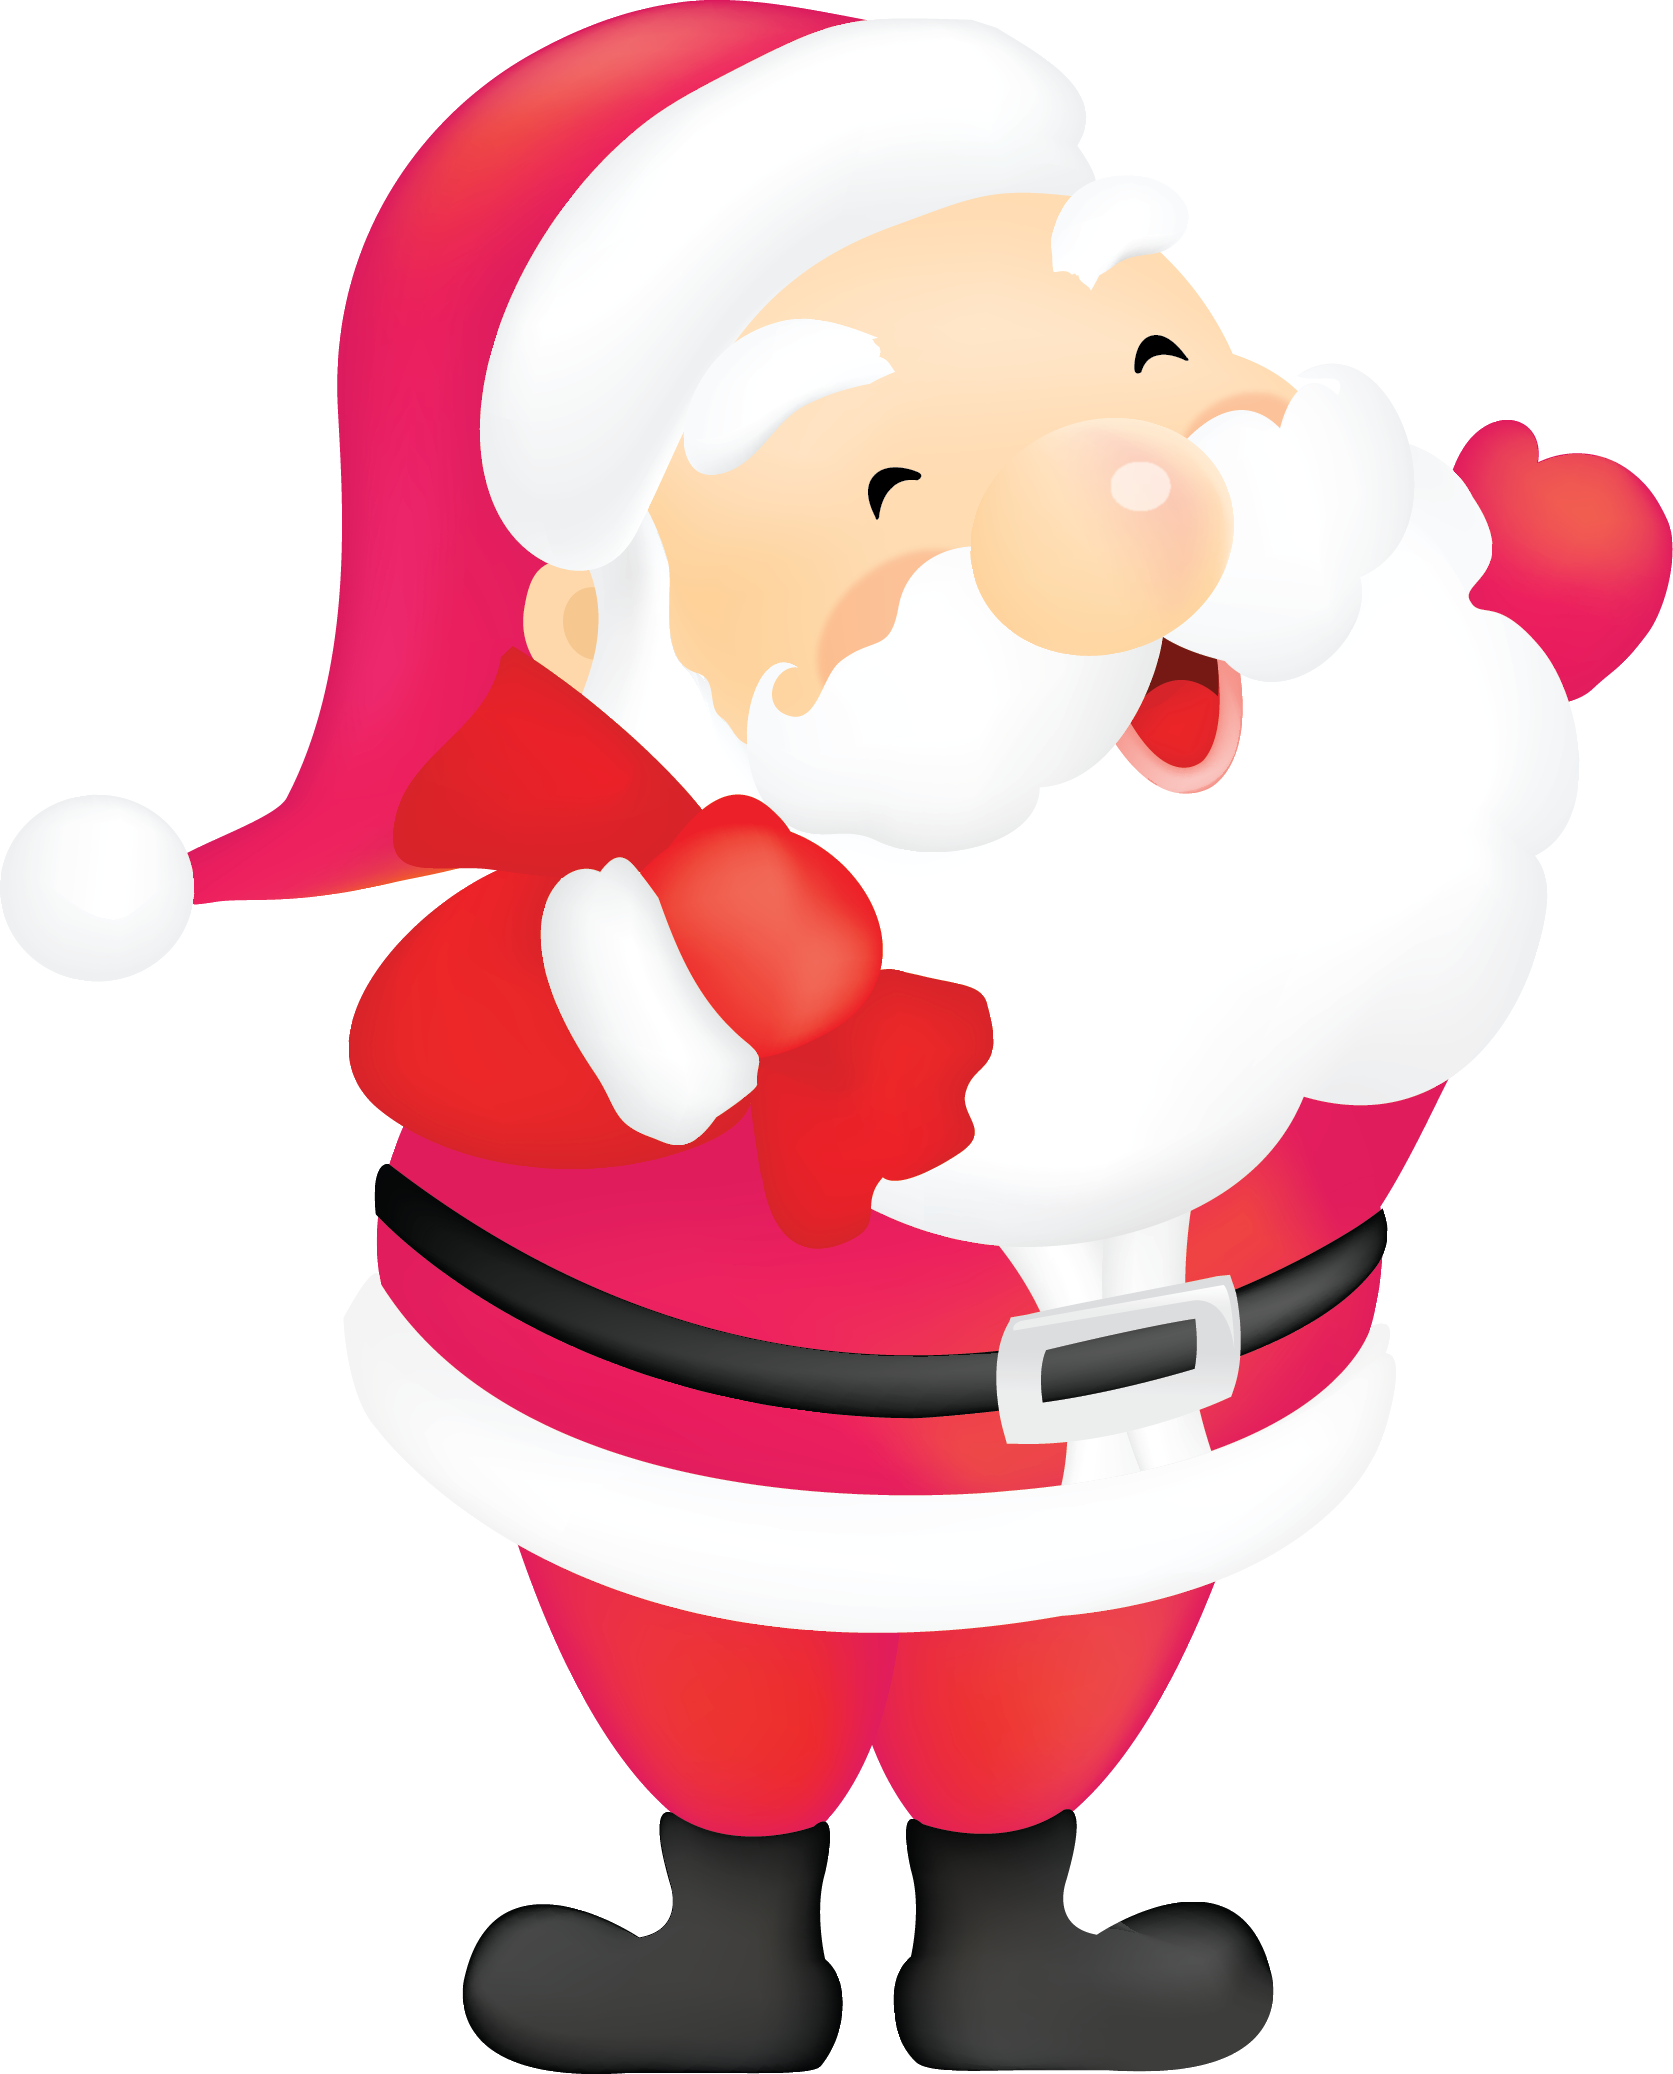 Images of father christmas clipart - ClipartFox